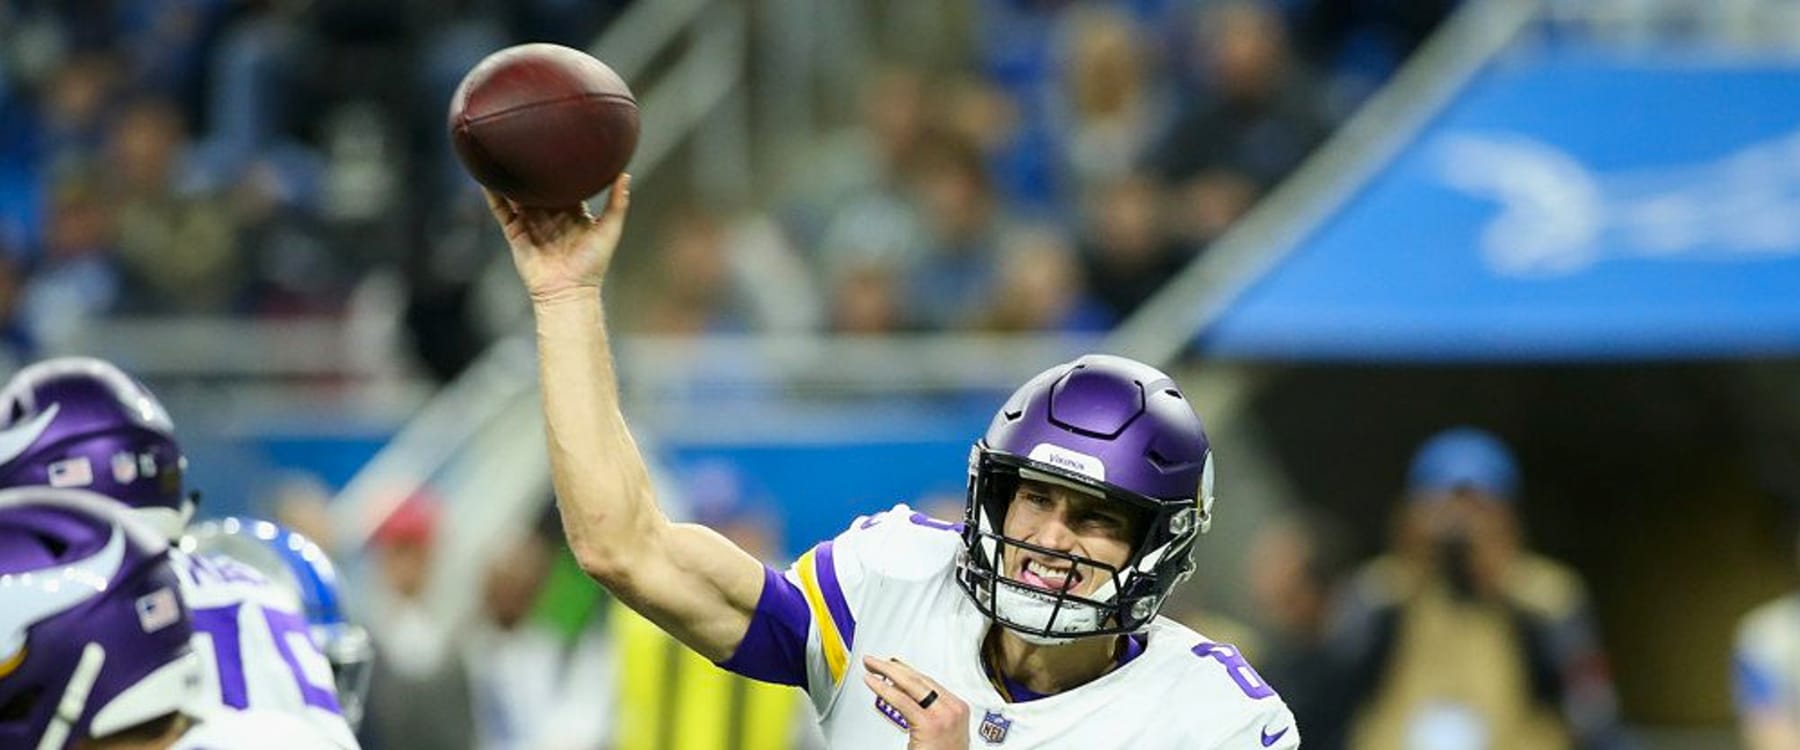 Kirk Cousins throws for two touchdowns as Vikings beat Bears - Los